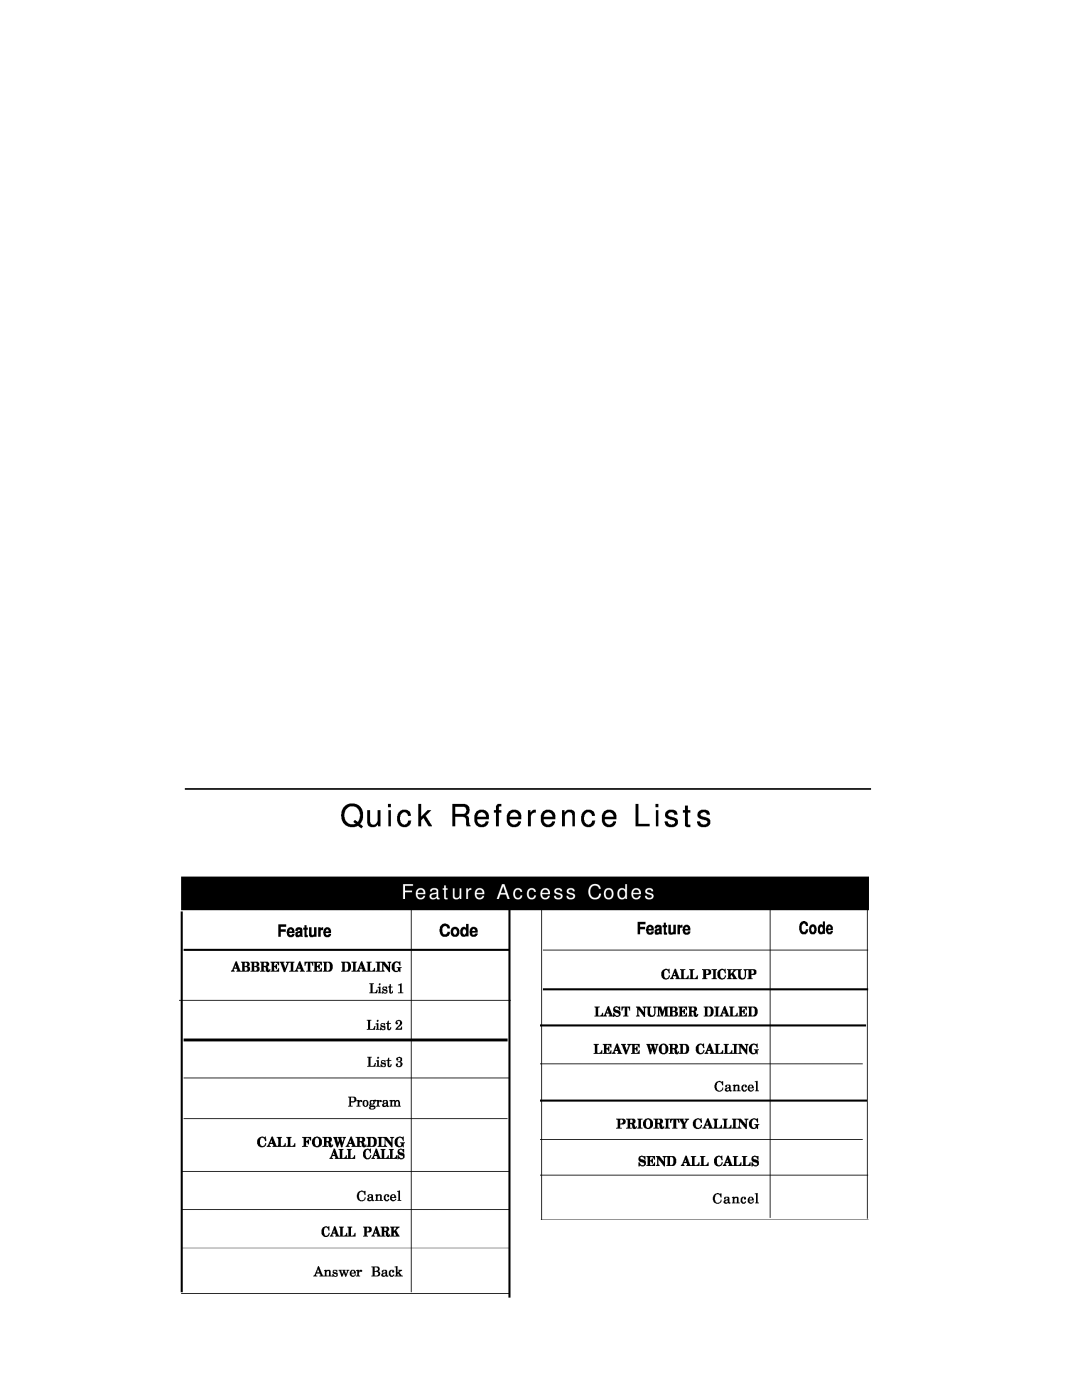 AT&T 8520T Feature Access Codes, Quick Reference Lists, Abbreviated Dialing, List List List Program, Cancel, Call Park 